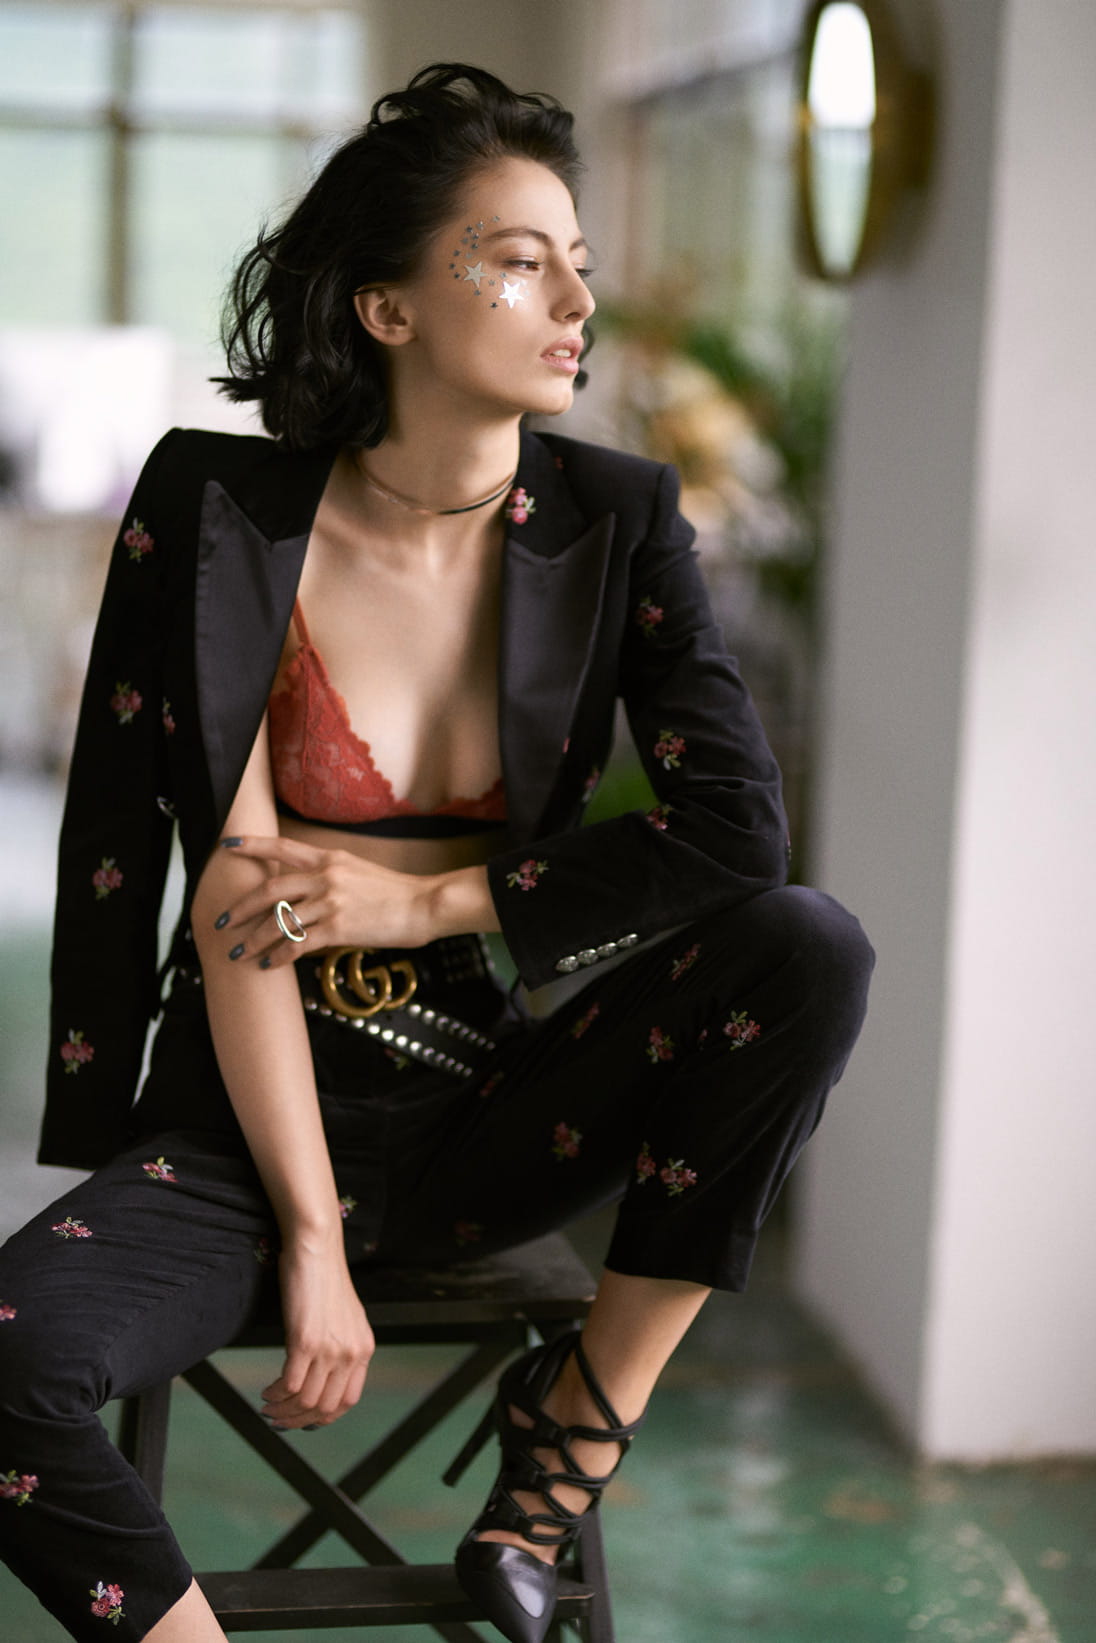 Model poses in a modern pant suit from The Kooples and bralette from COS